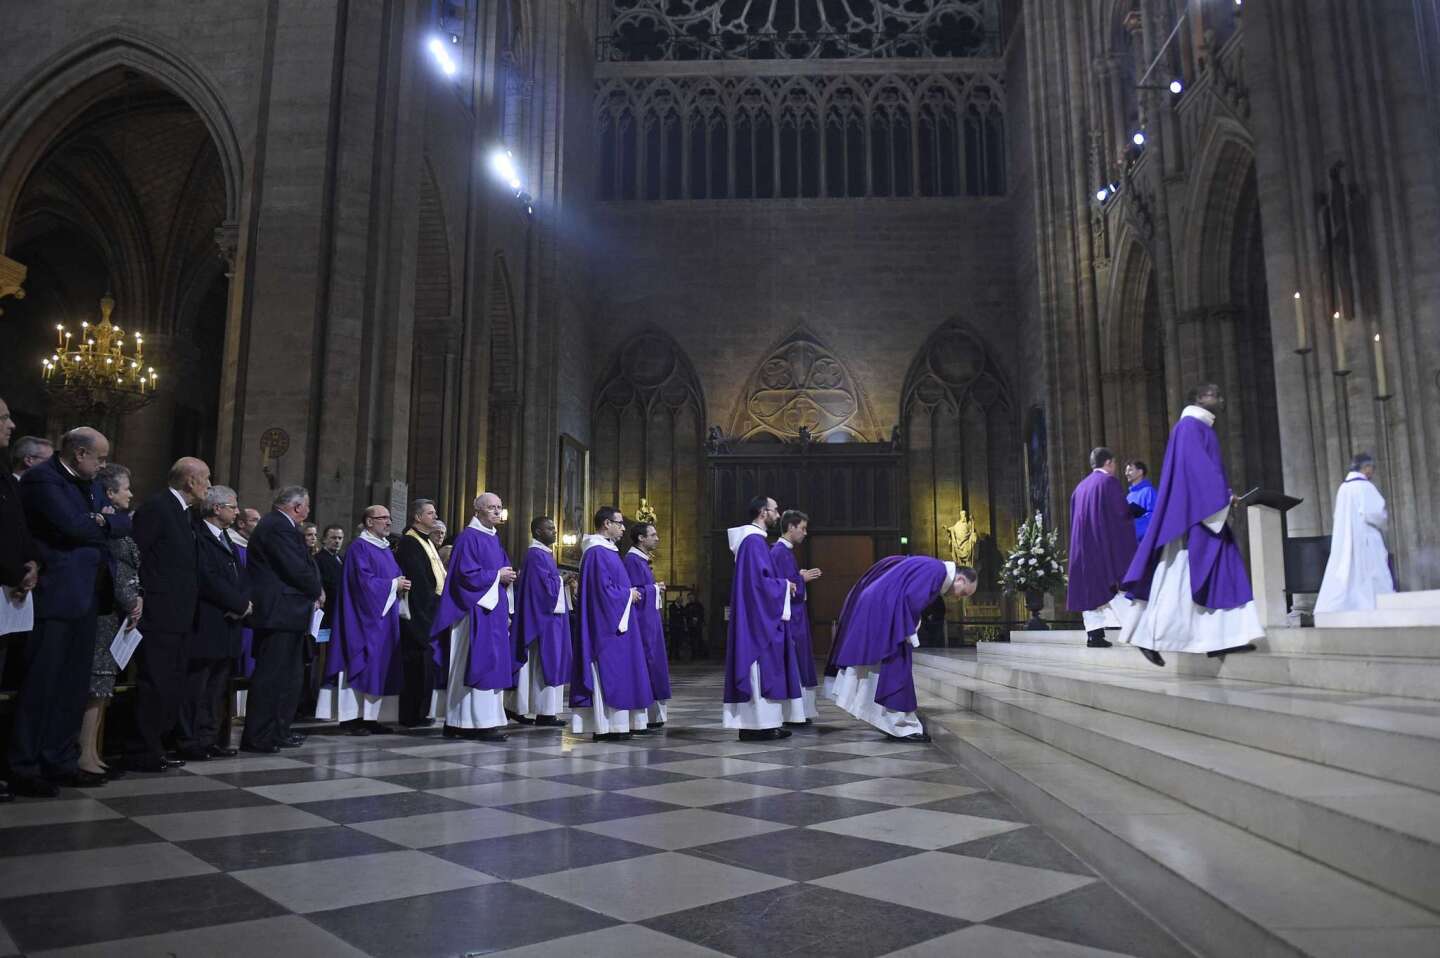 Prelates arrive to celebrate a Mass in memory of the attack victims at the Notre Dame cathedral.